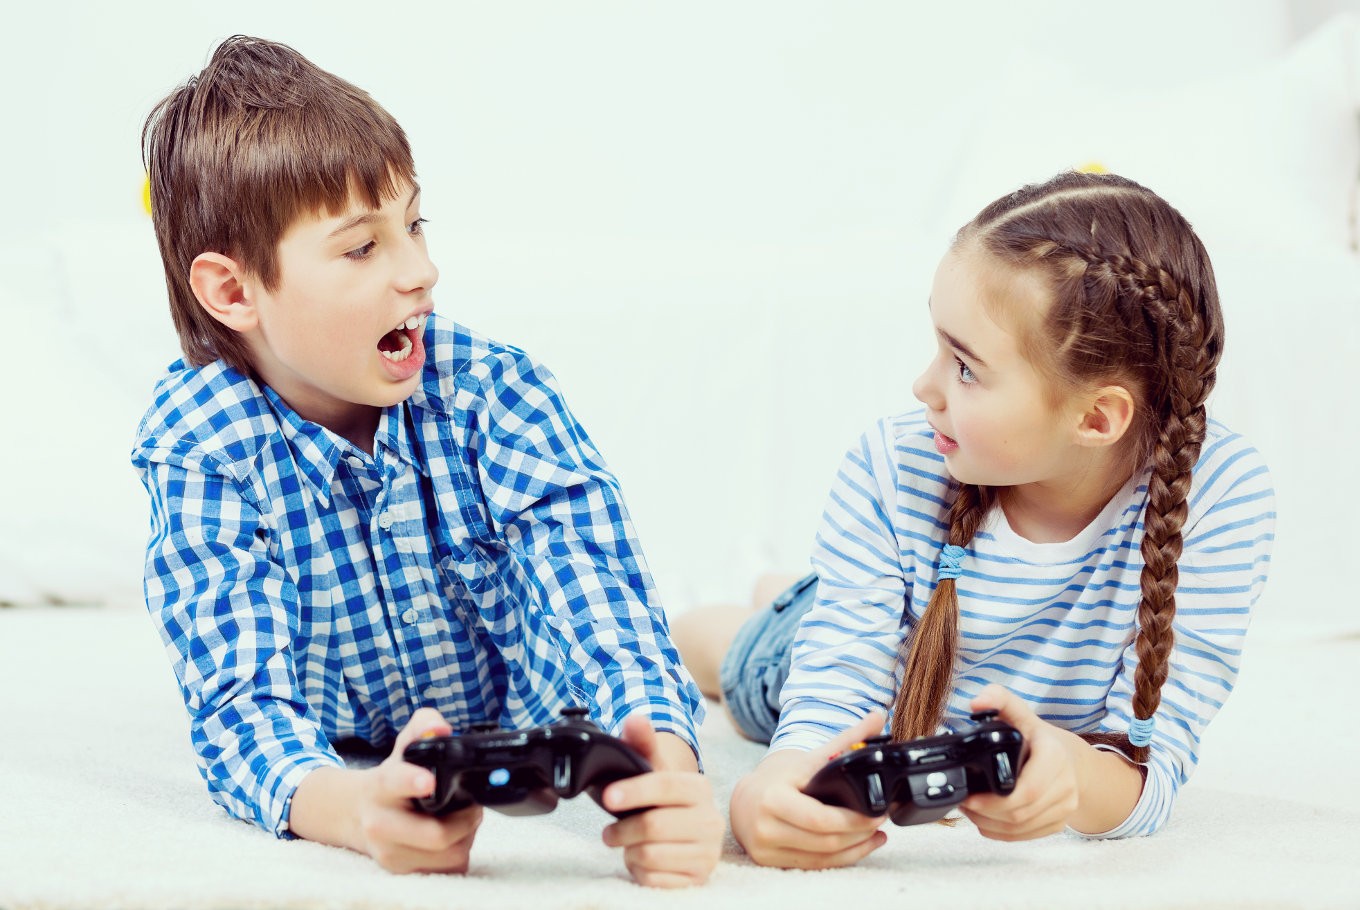 Kids playing video games not all bad